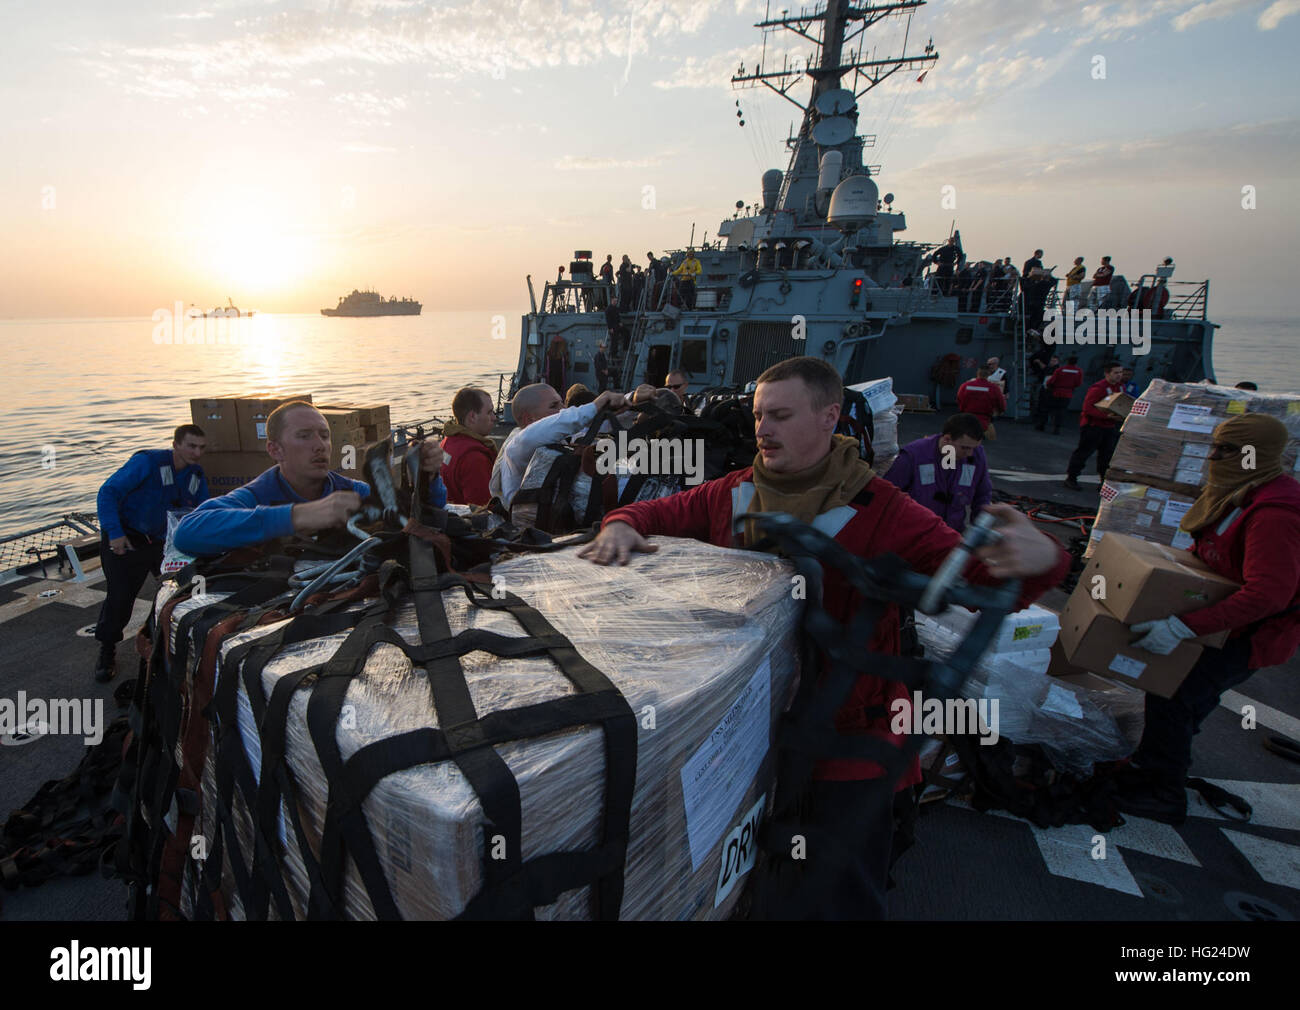 150213-N-RB546-118 ARABIAN GULF (Feb. 13, 2015) Sailors aboard guided-missile destroyer USS Mitscher (DDG 57) remove cargo nets from supplies after a vertical replenishment with the Military Sealift Command dry cargo and ammunition ship USNS Charles Drew (T-AKE 10) as an SA-330J Puma helicopter flies supplies to the USS Milius (DDG 69). Mitscher is deployed in the U.S. 5th Fleet area of operations supporting Operation Inherent Resolve, strike operations in Iraq and Syria as directed, maritime security operations and theater security cooperation efforts in the region. (U.S. Navy photo by Mass C Stock Photo